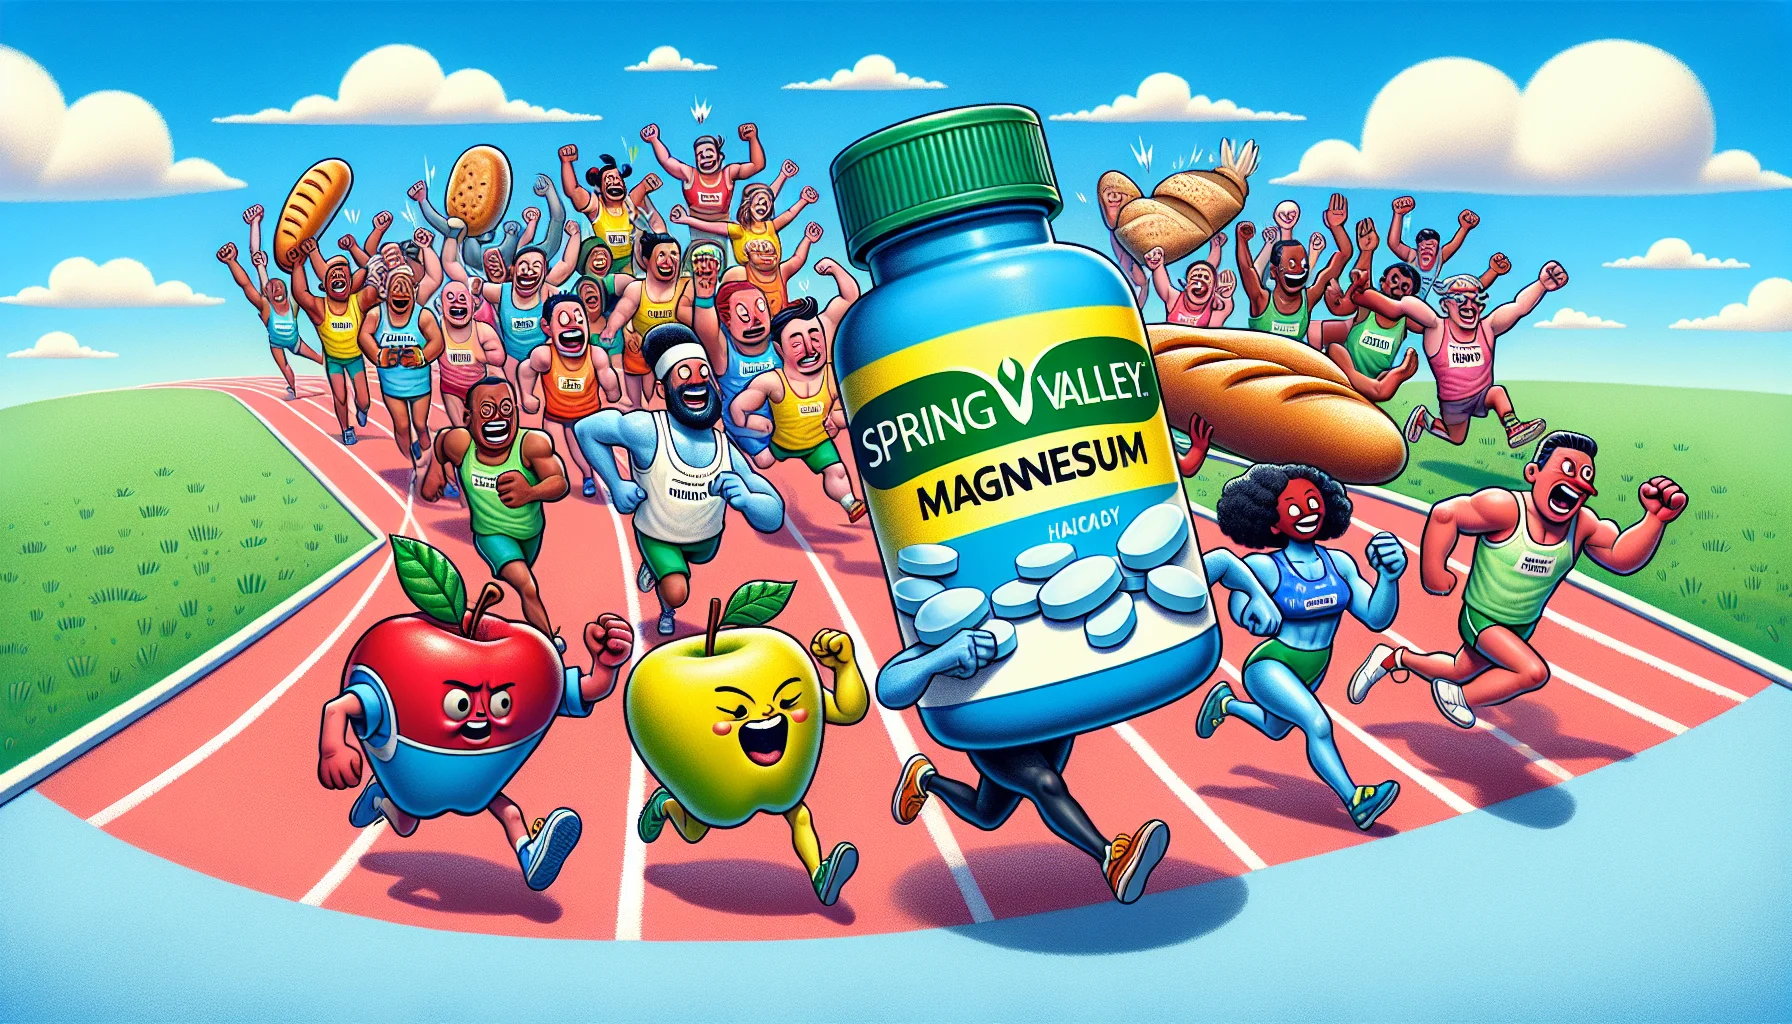 Imagine the following hilarious scenario: A high-quality bottle of Spring Valley Magnesium is running a relay race against regular food items like an apple, a loaf of bread, and a chicken drumstick. The magnesium pill, personified as an athletic figure, is leading the race, showcasing its superior energy. Both the pill and the food items are caricatured with expressive cartoon-style faces. The audience, consisting of various multiethnic individuals from Hispanic, Asian, Middle-Eastern, and Caucasian descents are cheering uproariously. They are of various genders and ages, all dressed in colorful sportswear. Above, a playful azure sky conveys a warm yet refreshing springtime atmosphere.